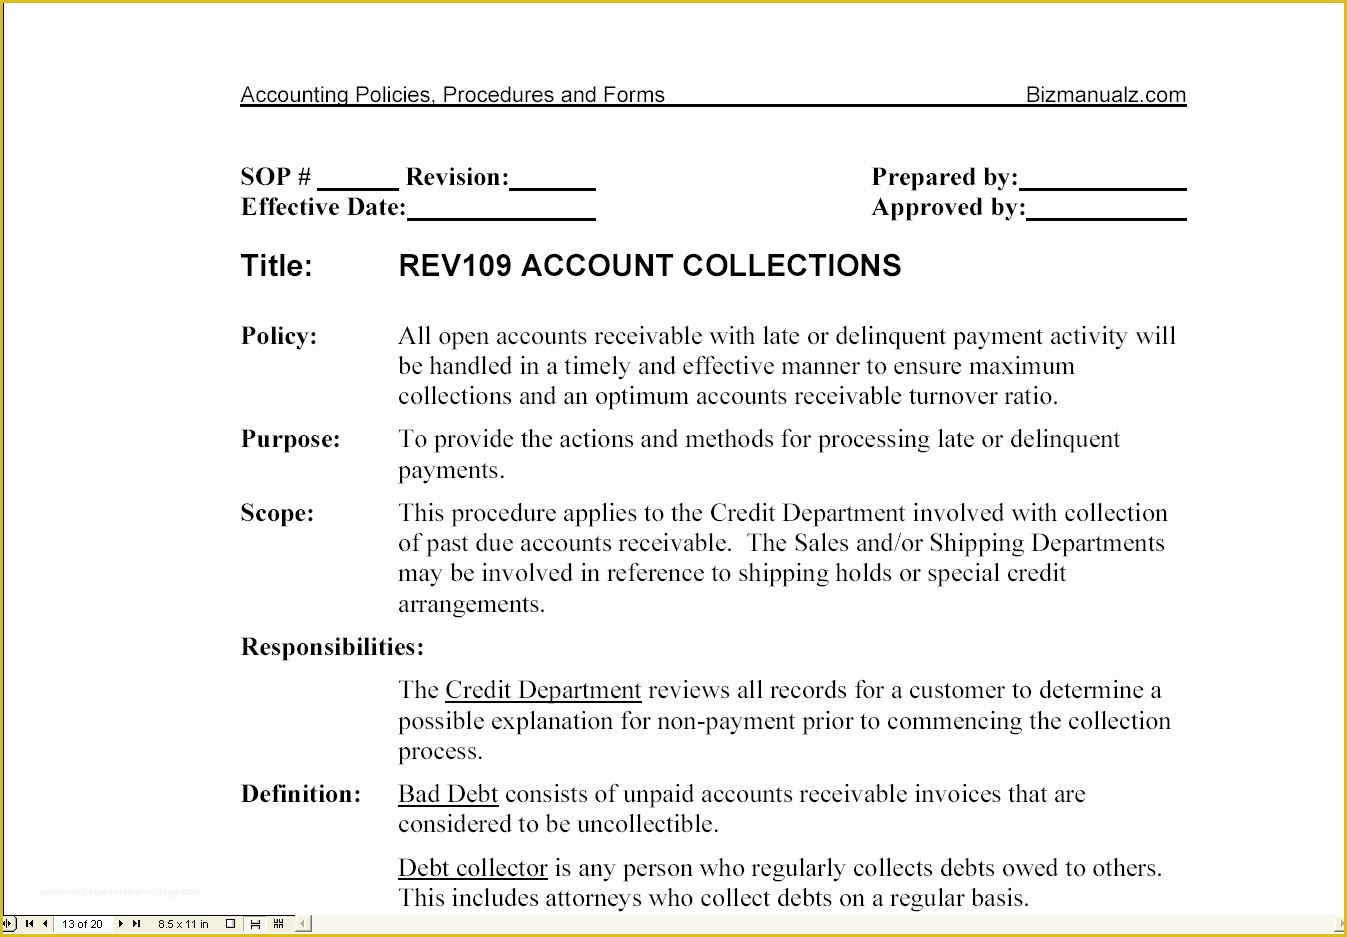 Accounting Policies and Procedures Template Free Of Bizmanualz Accounting Policies Procedures and forms Mbaware